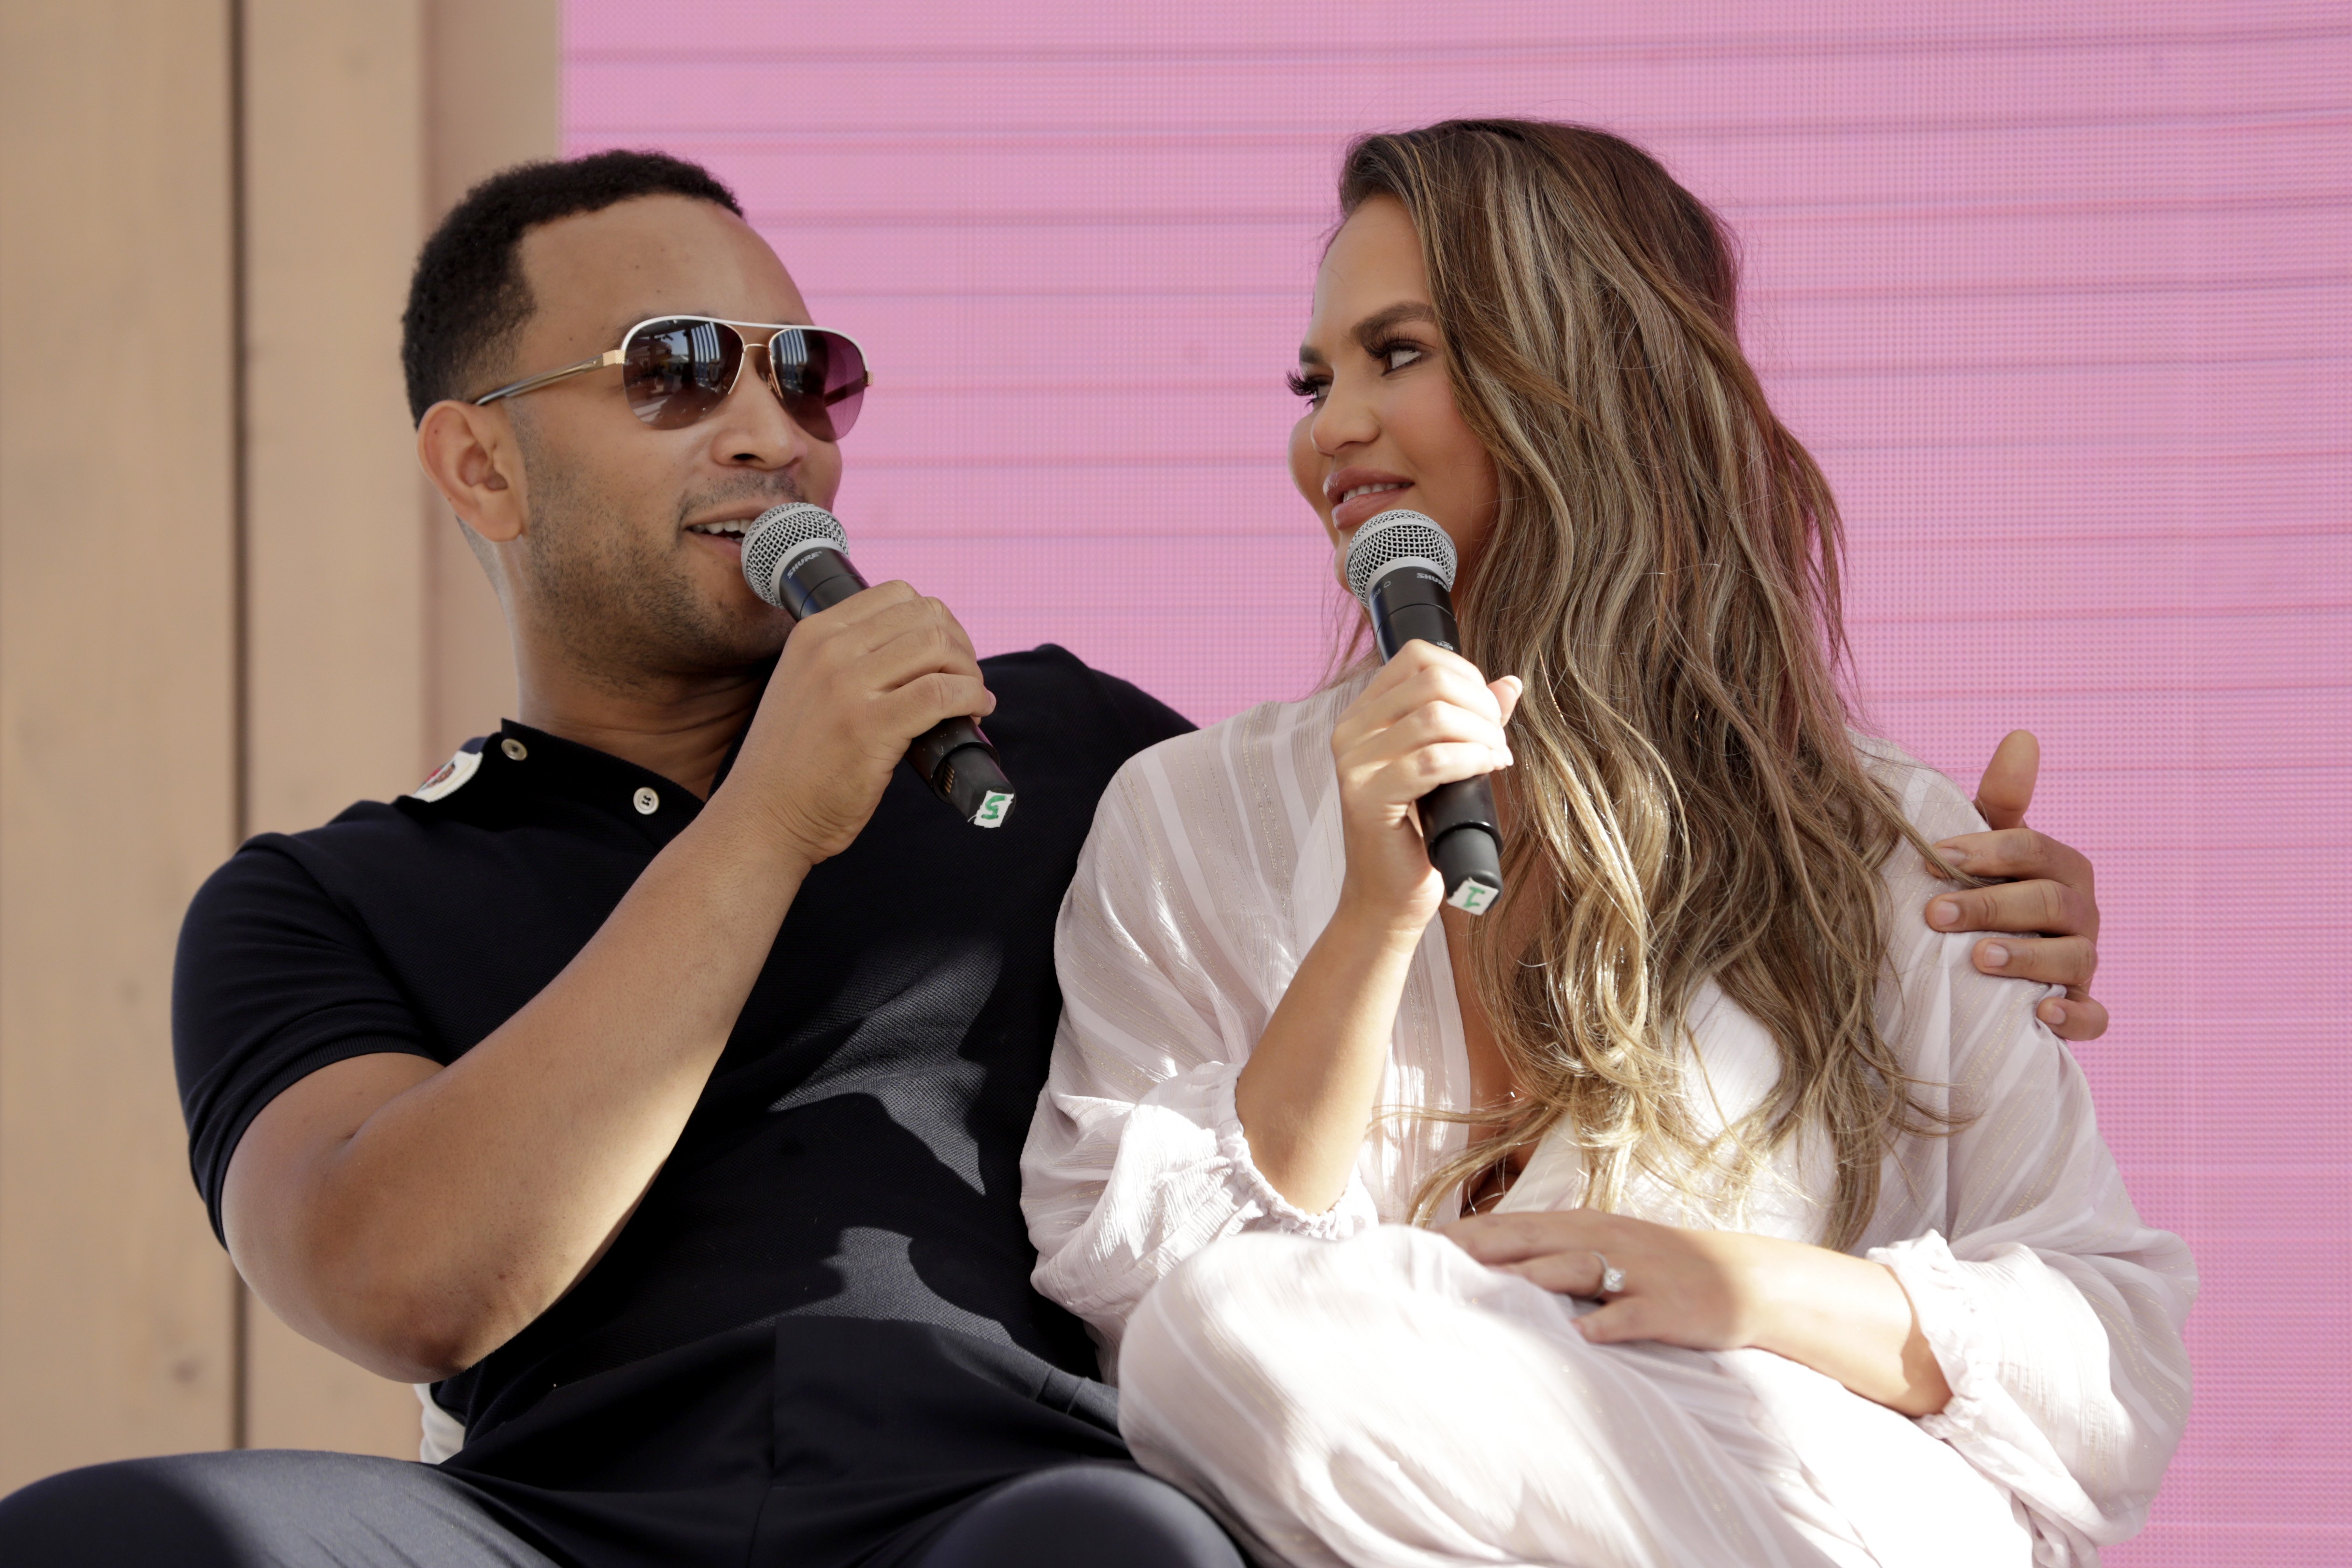 Chrissy Teigen and John Legend go behind the Tweets at #TwitterBeach at Cannes Lions on June 18, 2019 in Cannes, France | Photo: Getty Images